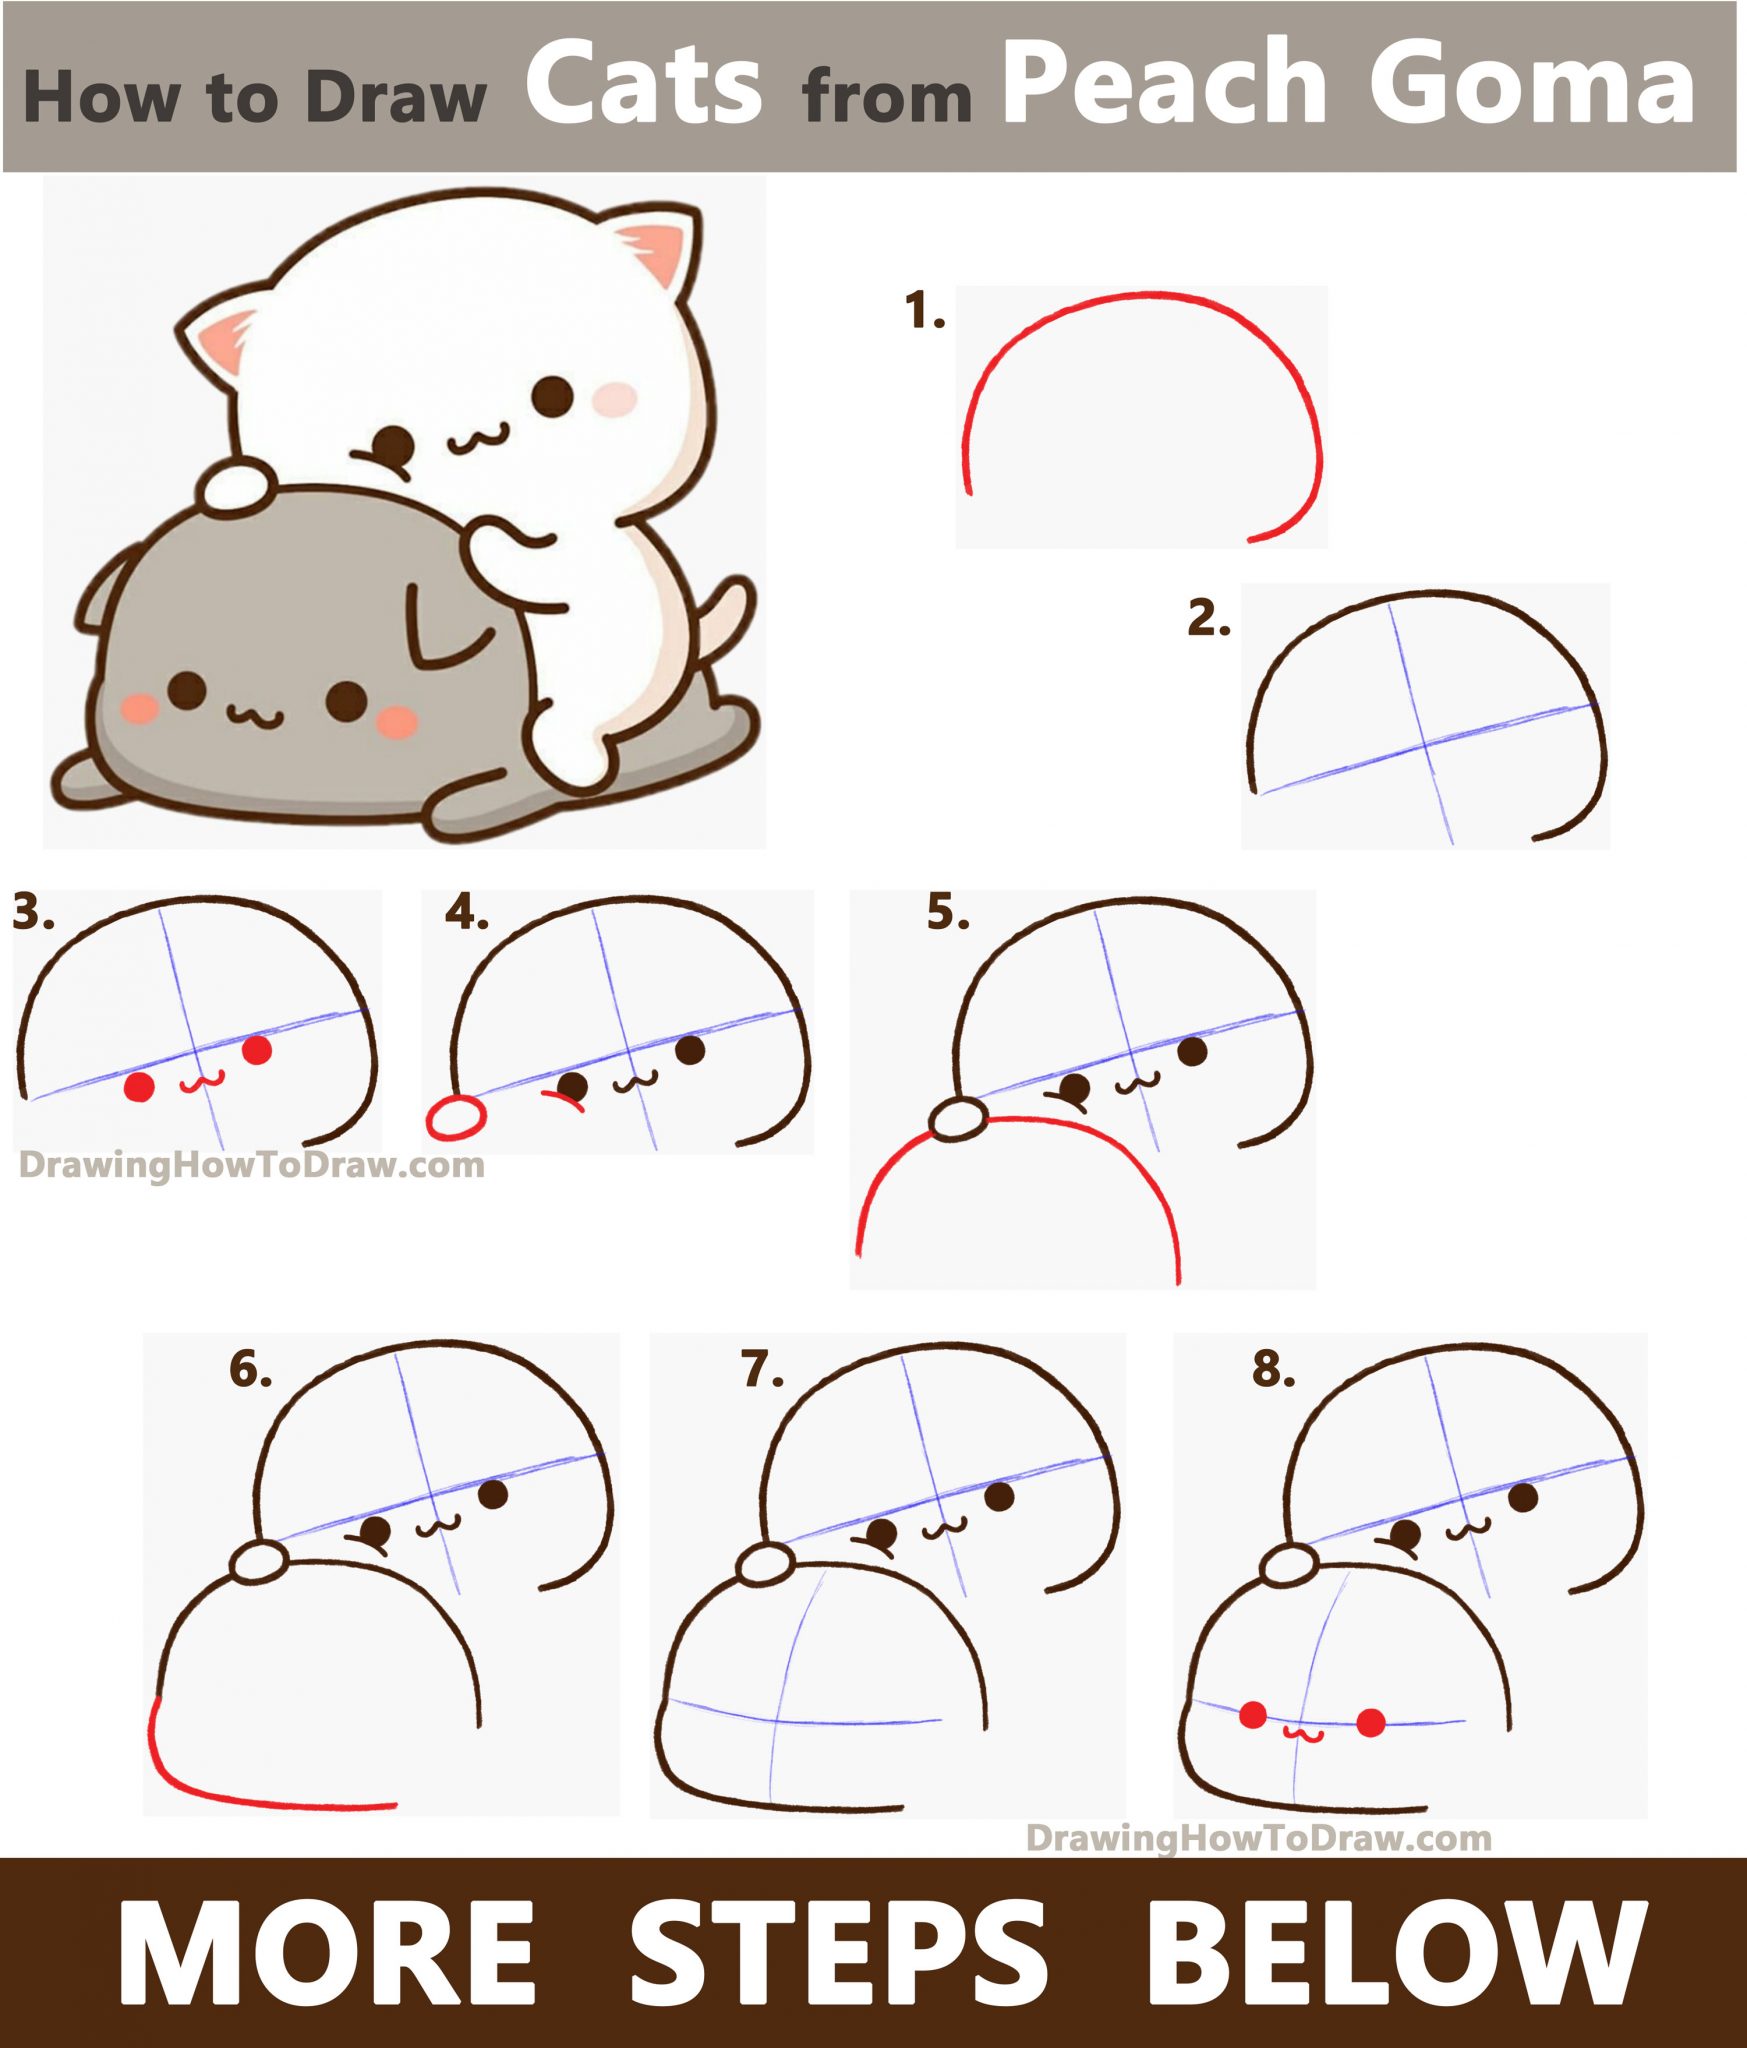 How to Draw 2 Cats from Peach Goma (Super Cute / Kawaii) Easy Step by